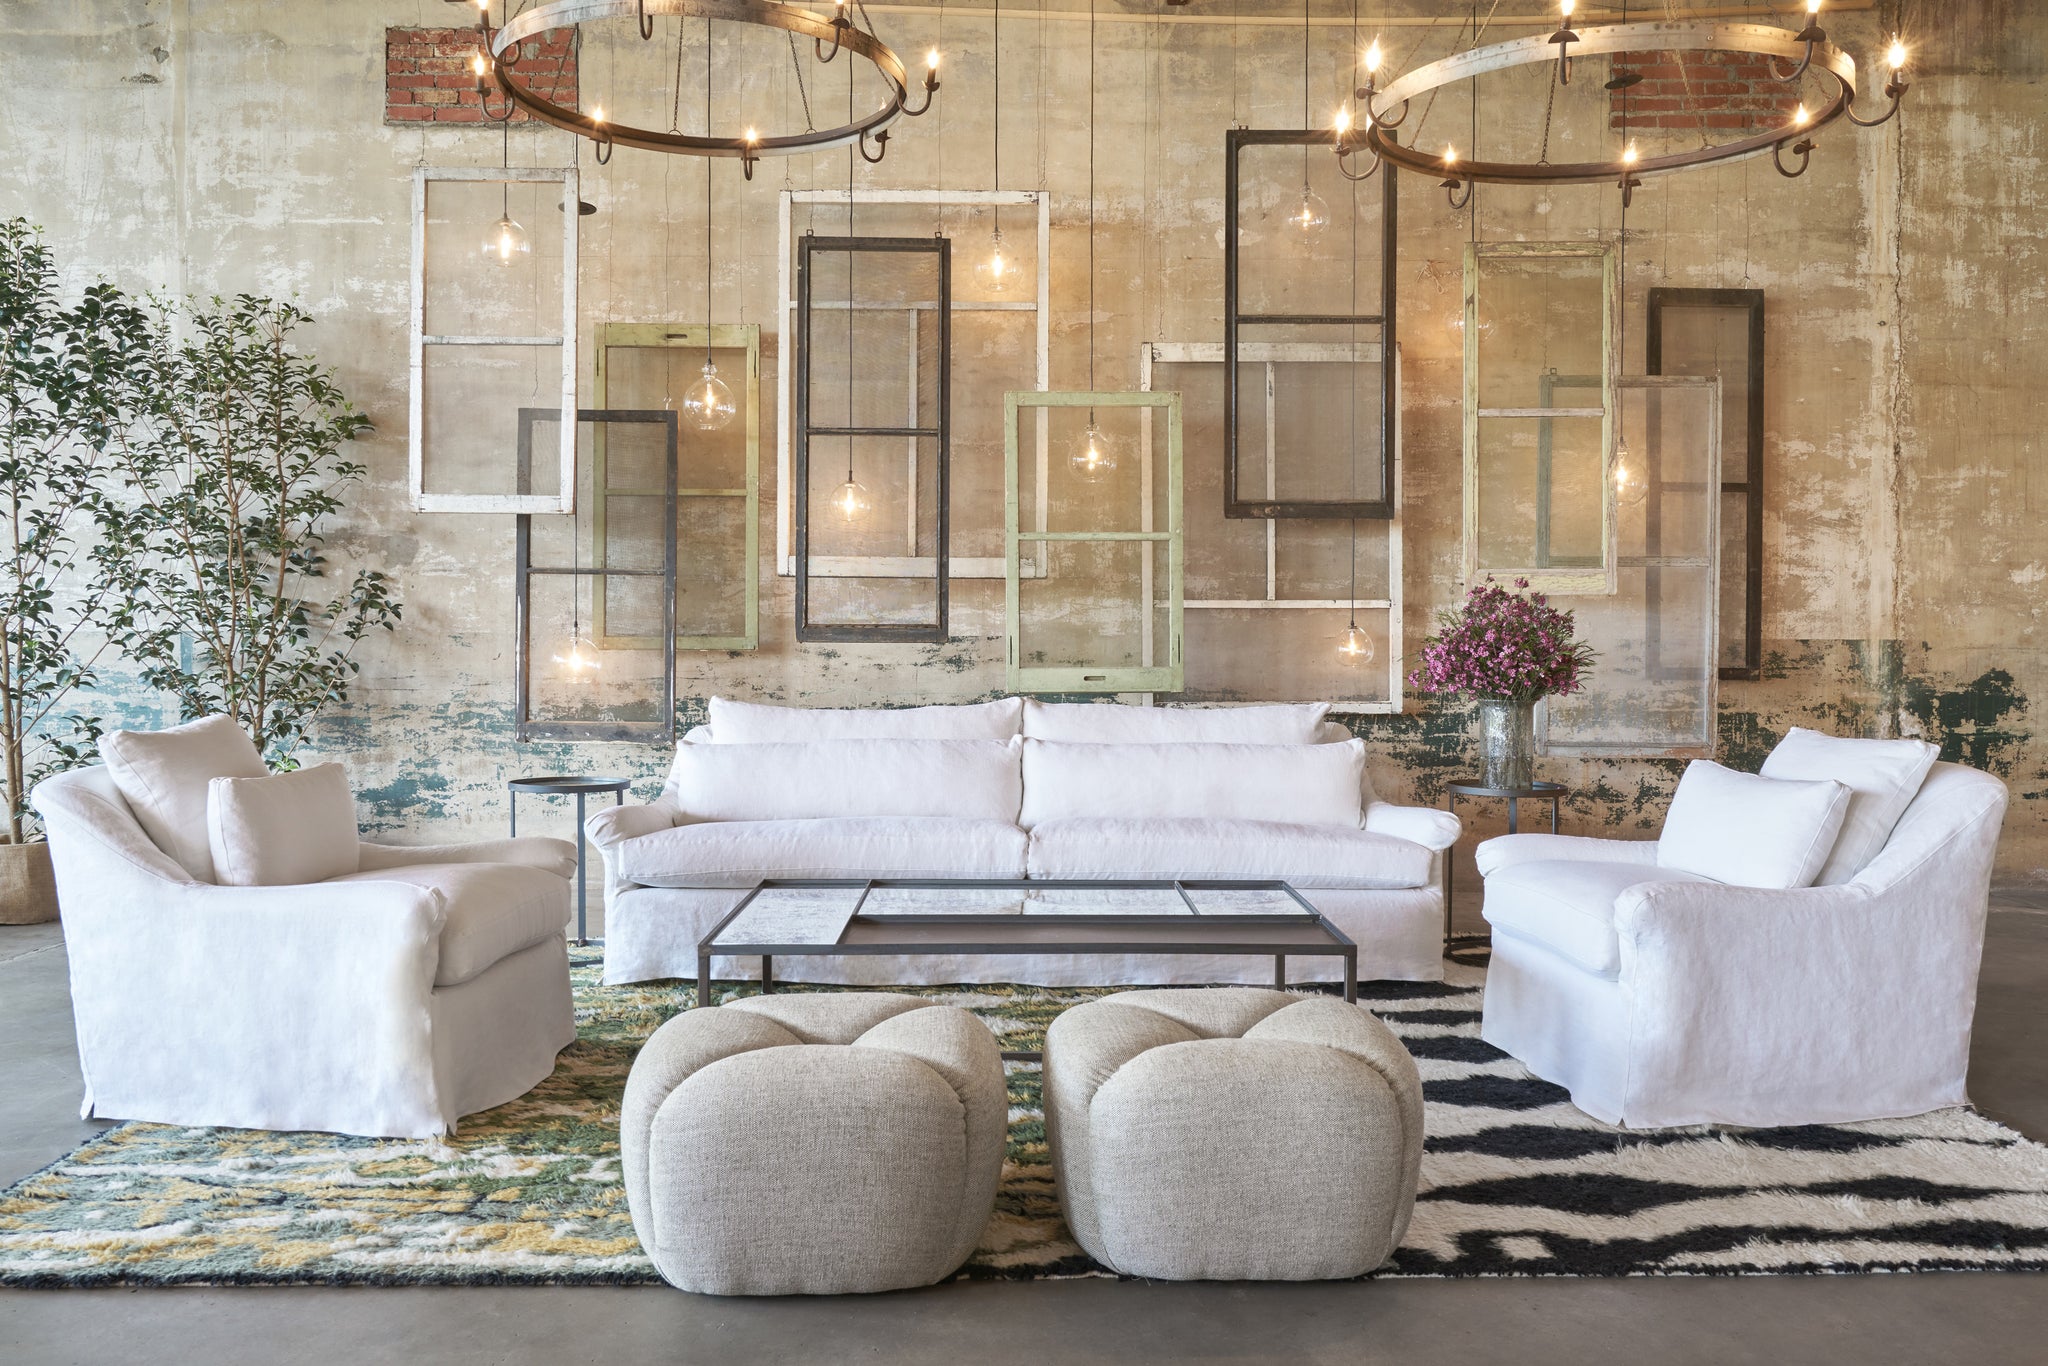  White sofa and two armchairs in front of a concrete wall with windows hanging. 2 poufs are in front of the coffee table. Photographed in Salerno Olive. 